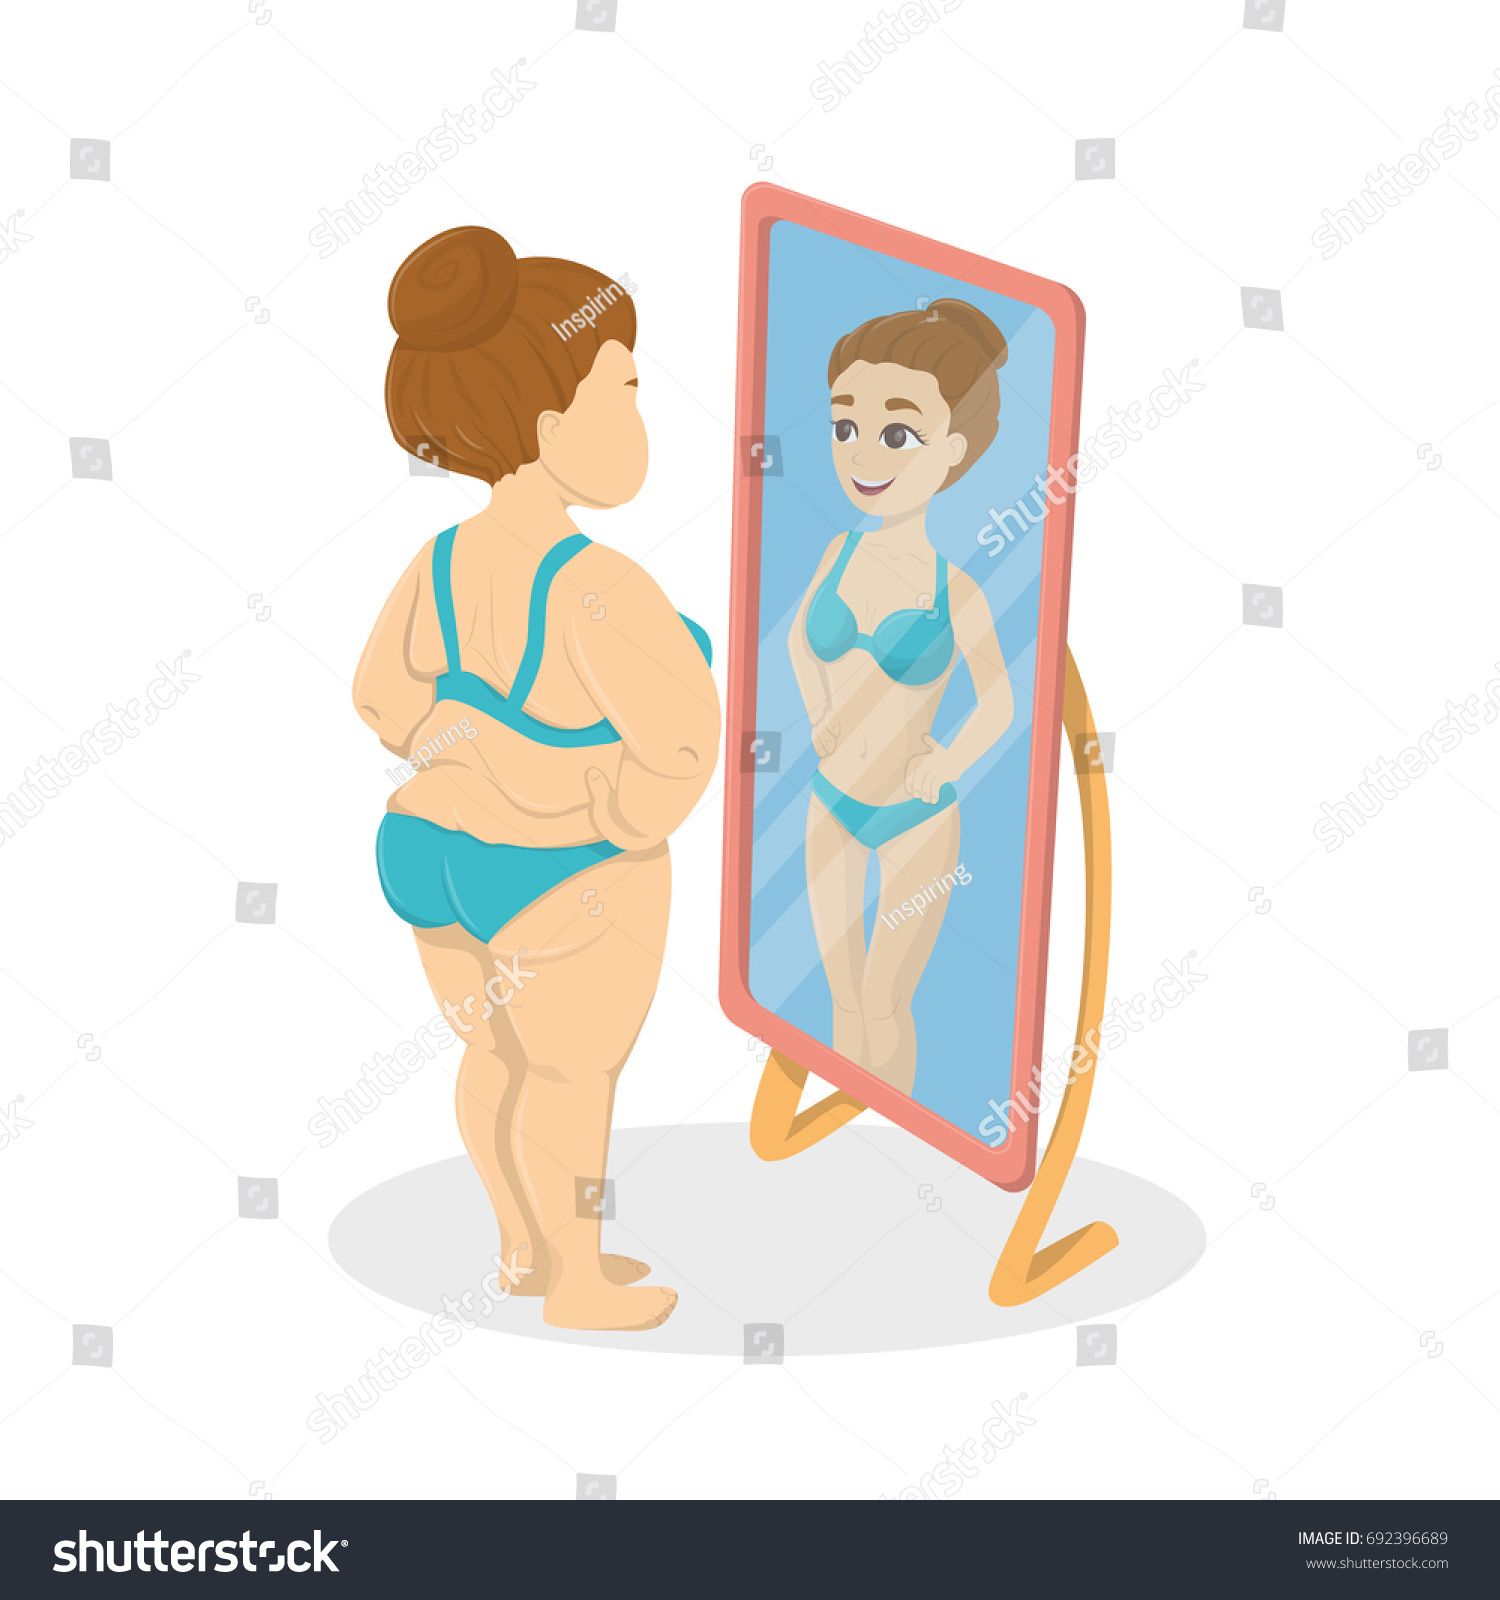 Hôm rày nhịn ăn.. Stock-photo-fat-and-skinny-woman-in-the-mirrors-concept-of-anorexia-and-bulimia-692396689